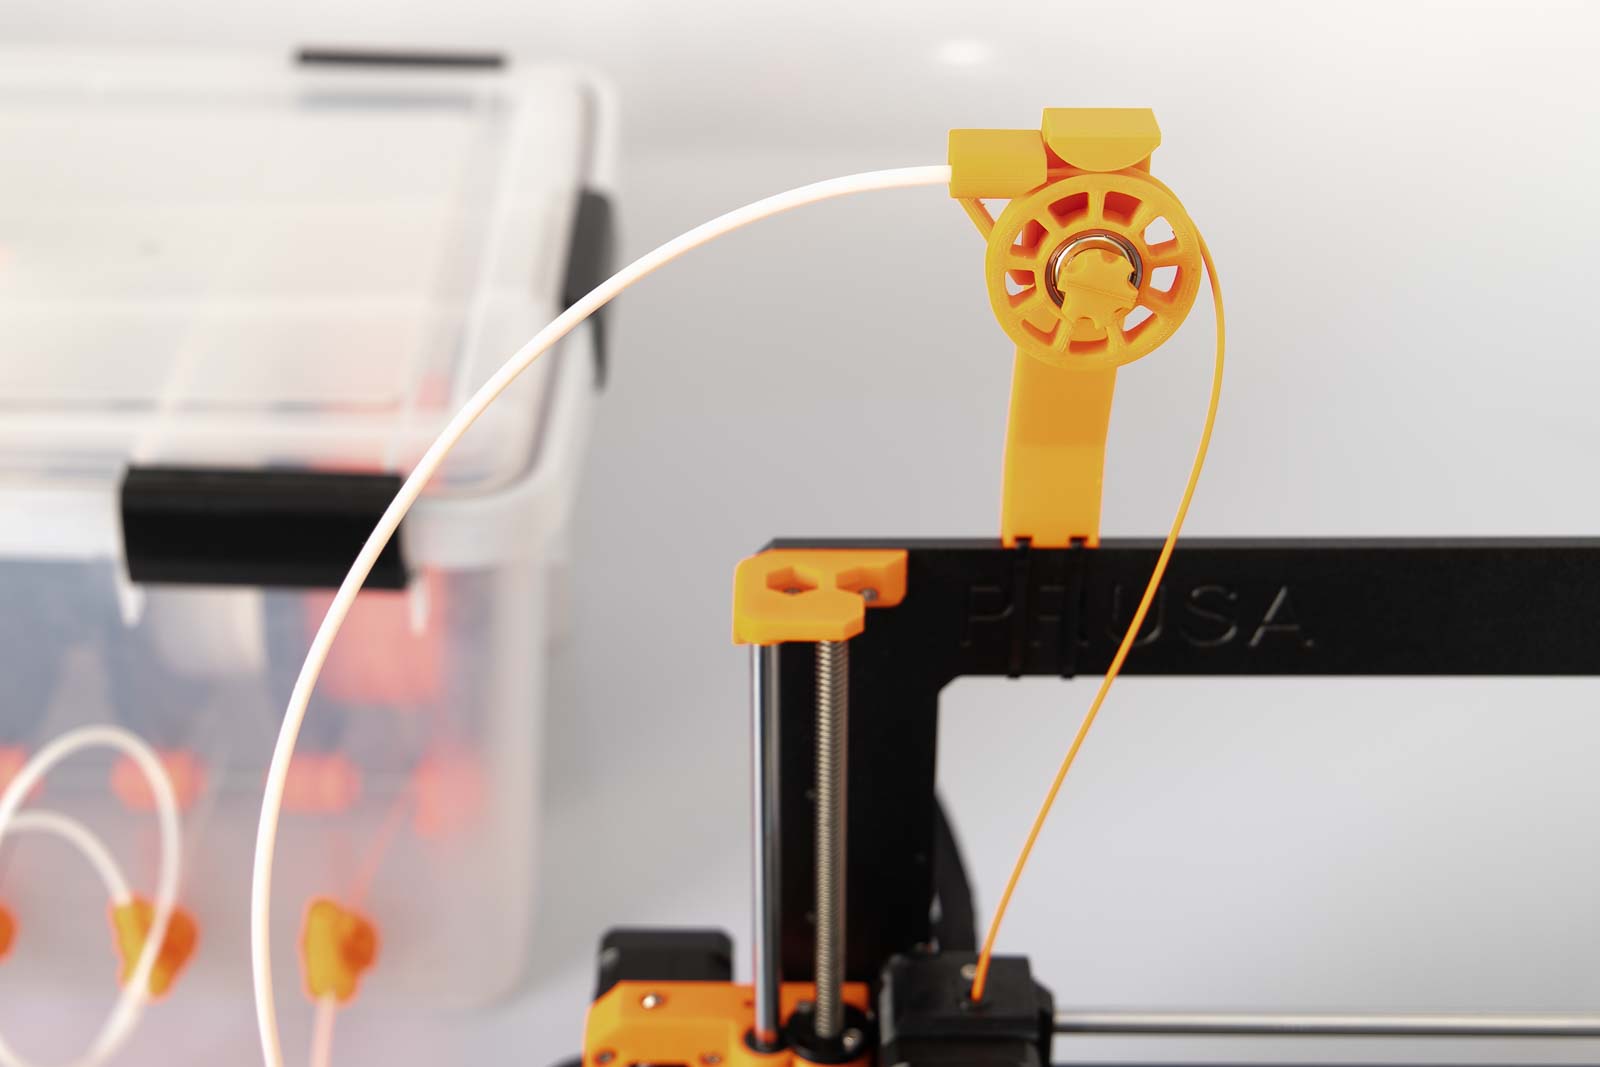 Filament guide with pulley mounted on the 3D printer with filament box in the background